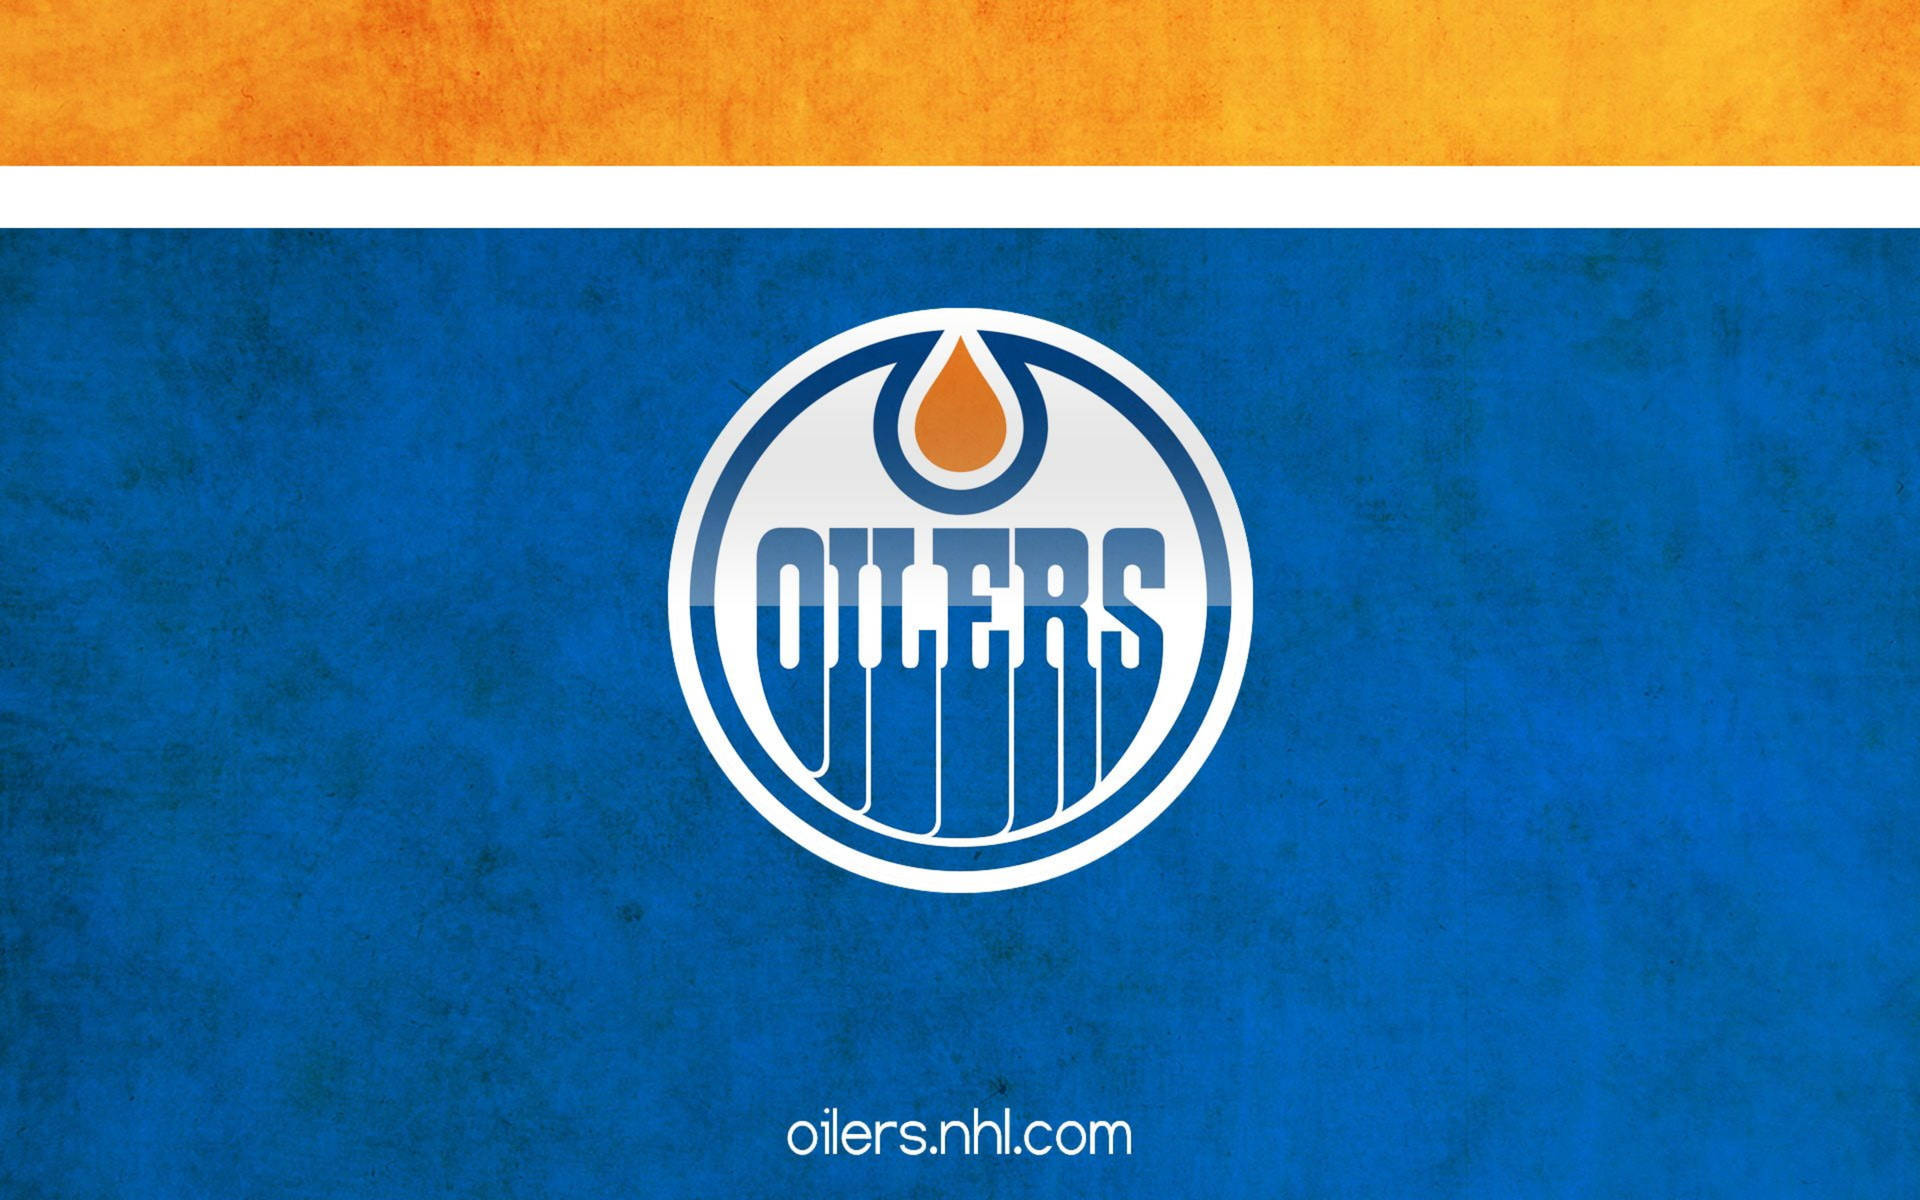 Edmonton Oilers In Action During A High Stakes Hockey Game Wallpaper